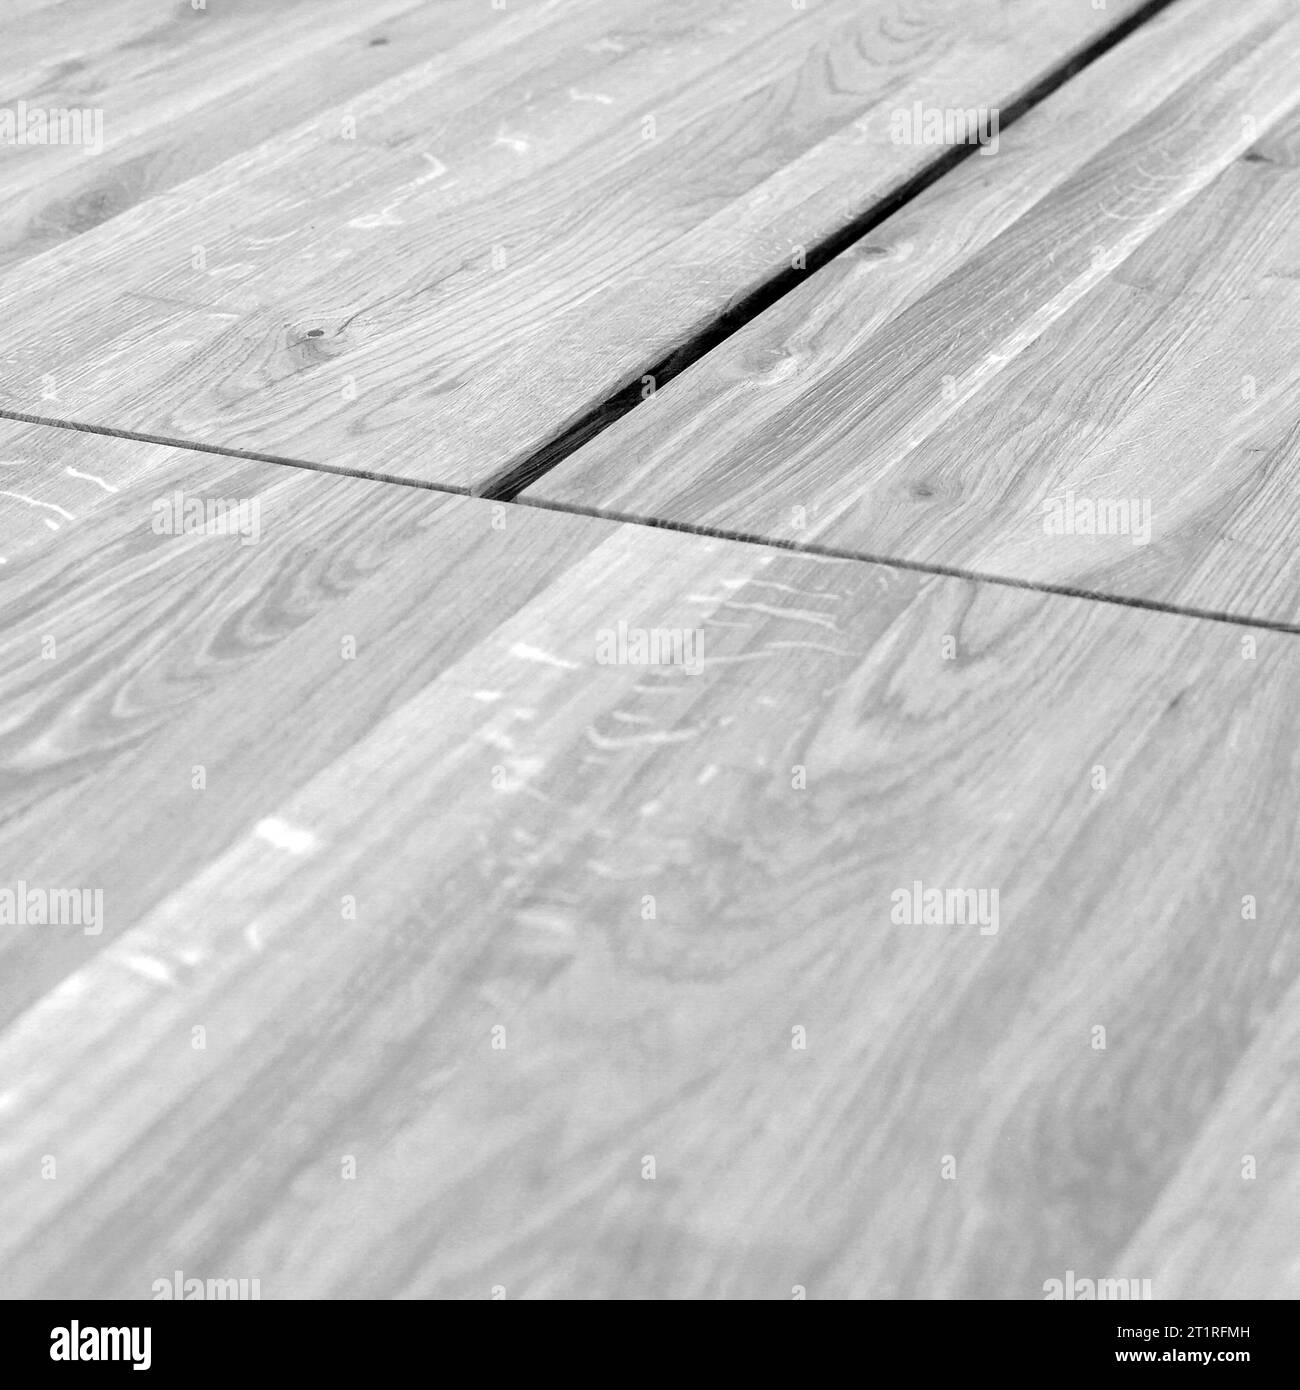 Natural wood texture. Wooden furniture surface background Stock Photo